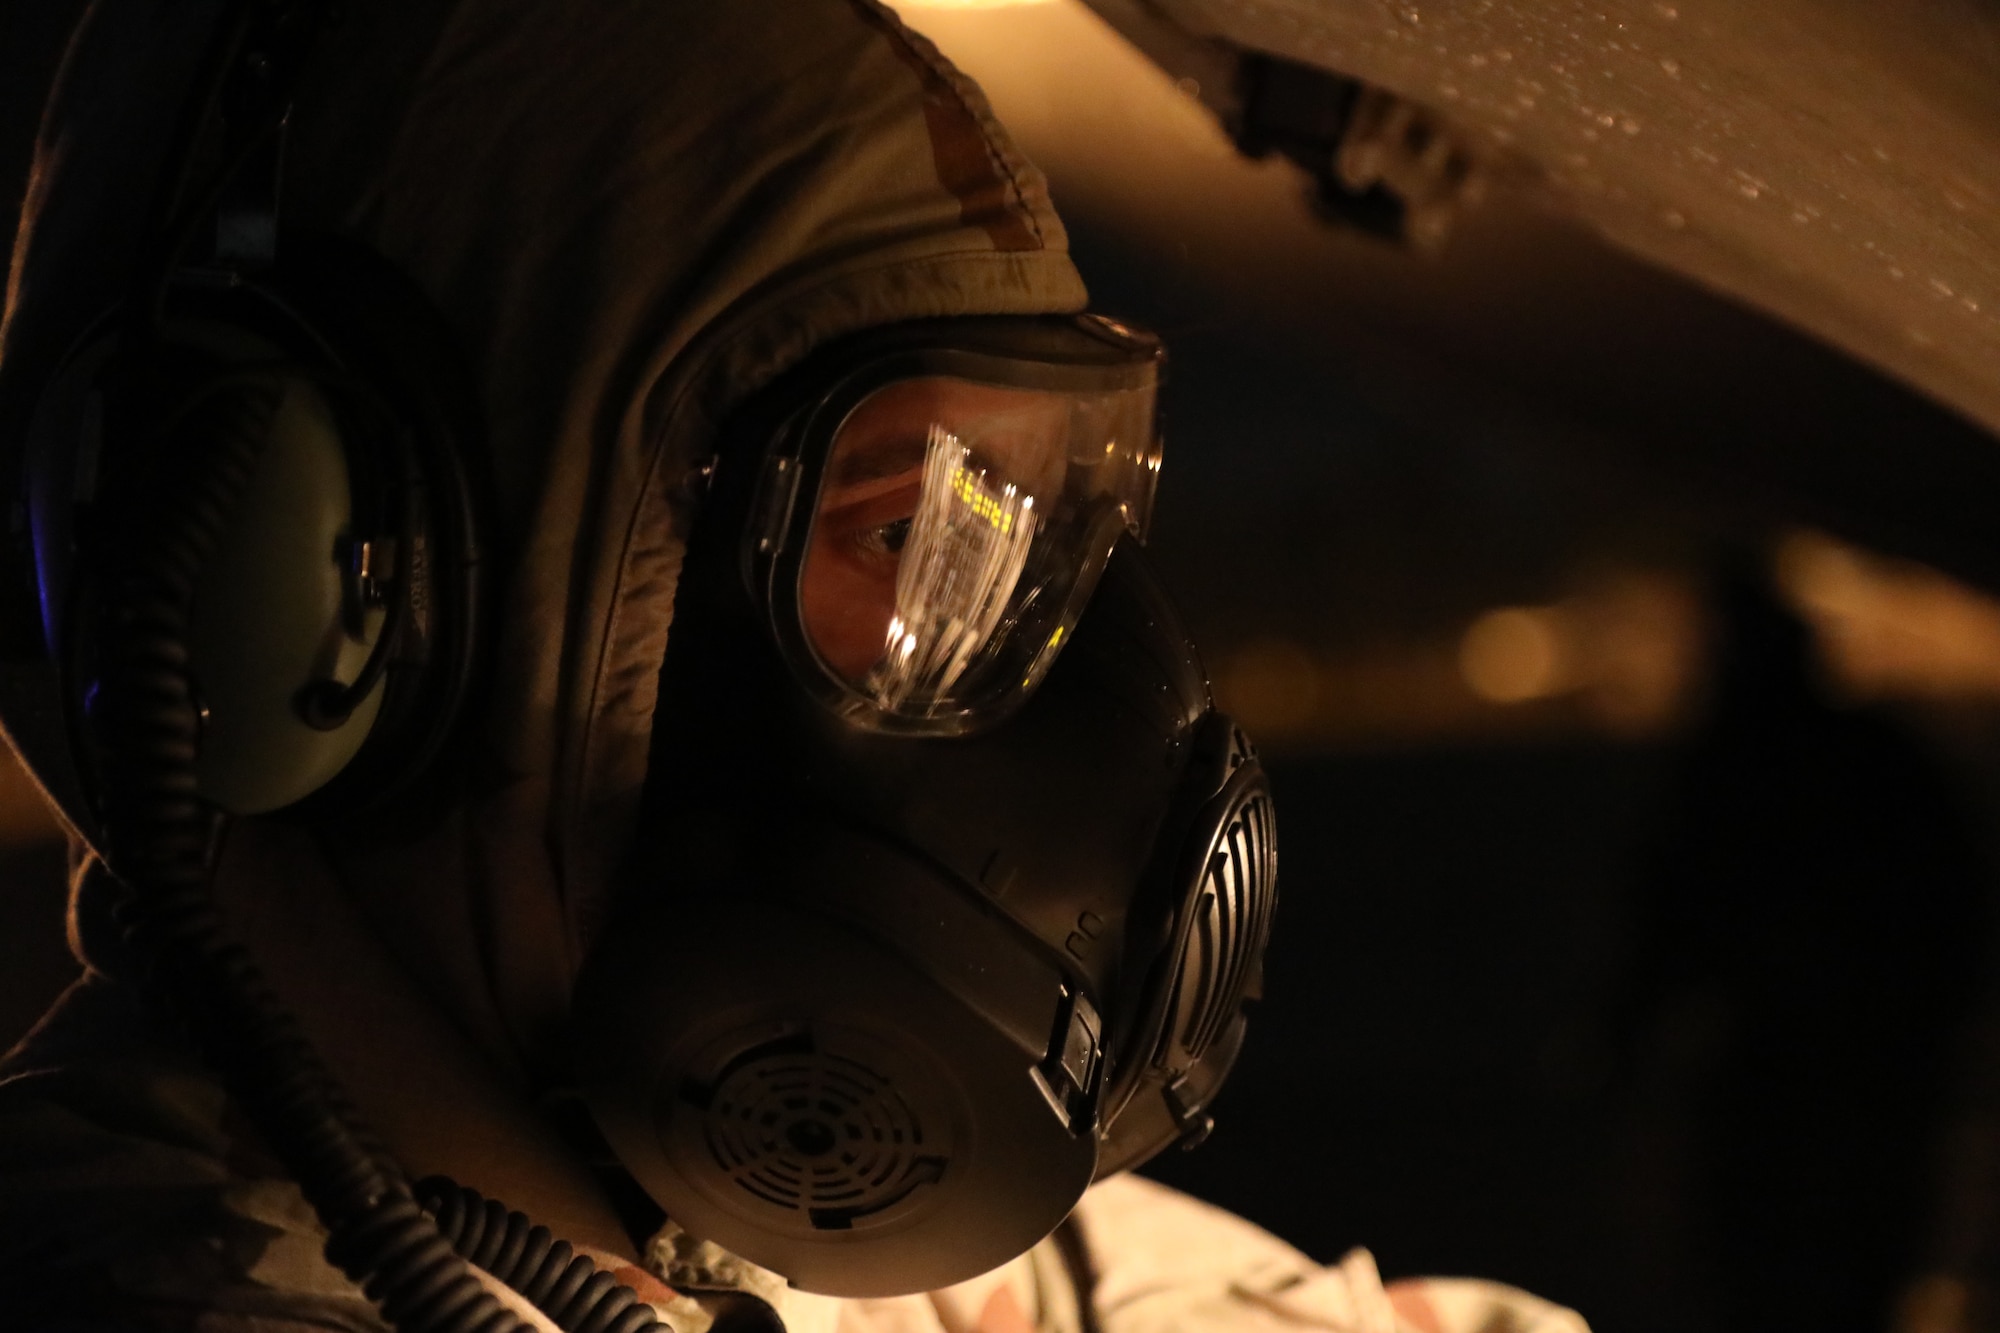 U.S. Air Force Staff Sgt. Jose Chirino, 62nd Aircraft Maintenance Squadron crew chief, prepares a C-17 Globemaster III for refueling while under simulated chemical, biological, radiological and nuclear conditions during Exercise Rainier War 21B at Joint Base Lewis-McChord, Washington, Nov. 3, 2021. Rainier War is a semi-annual, large readiness exercise led by 62nd Airlift Wing, designed to train Airmen under realistic scenarios that support a full spectrum readiness operations against modern threats and replicate today’s contingency operations. (U.S. Air Force photo by Senior Airman Christopher Sommers)